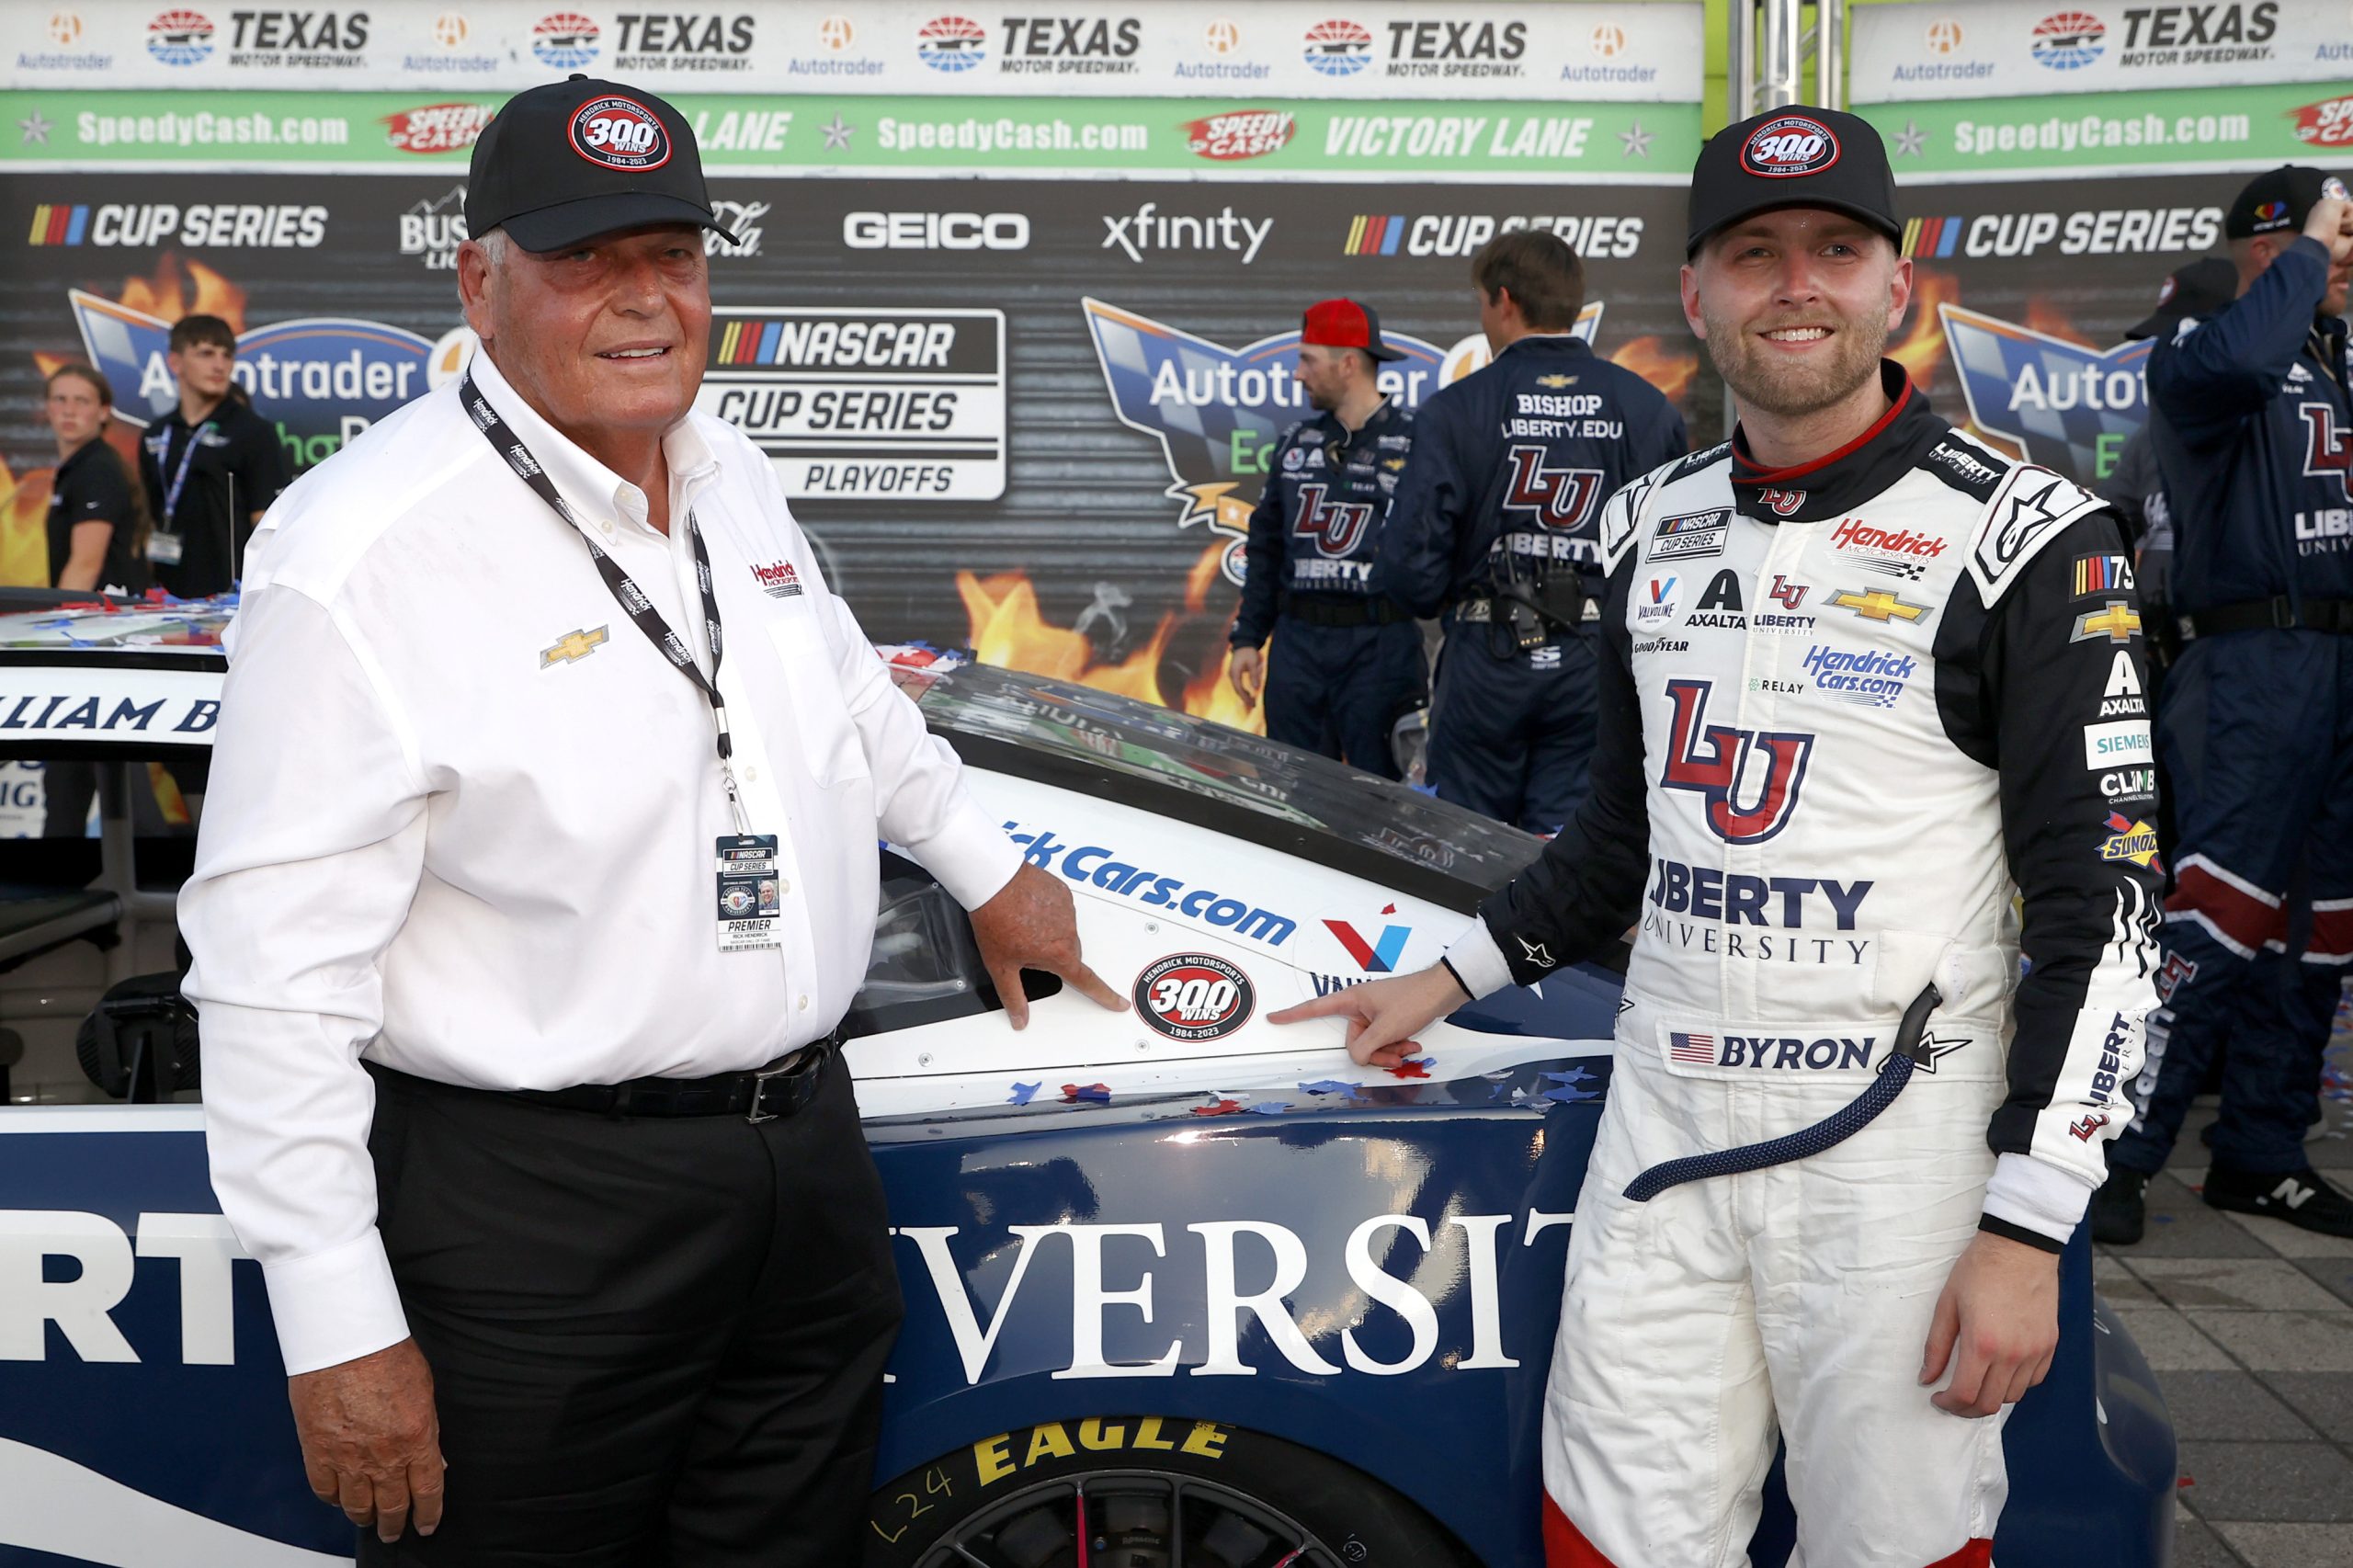 NASCAR Hall of Famer Rick Hendrick team owner of Hendrick Motorsport (L) and William Byron, driver of the #24 Liberty University Chevrolet, celebrate Hendrick Motorsports' 300th NASCAR Cup Series win after winning the NASCAR Cup Series Autotrader EchoPark Automotive 400 at Texas Motor Speedway on September 24, 2023 in Fort Worth, Texas.